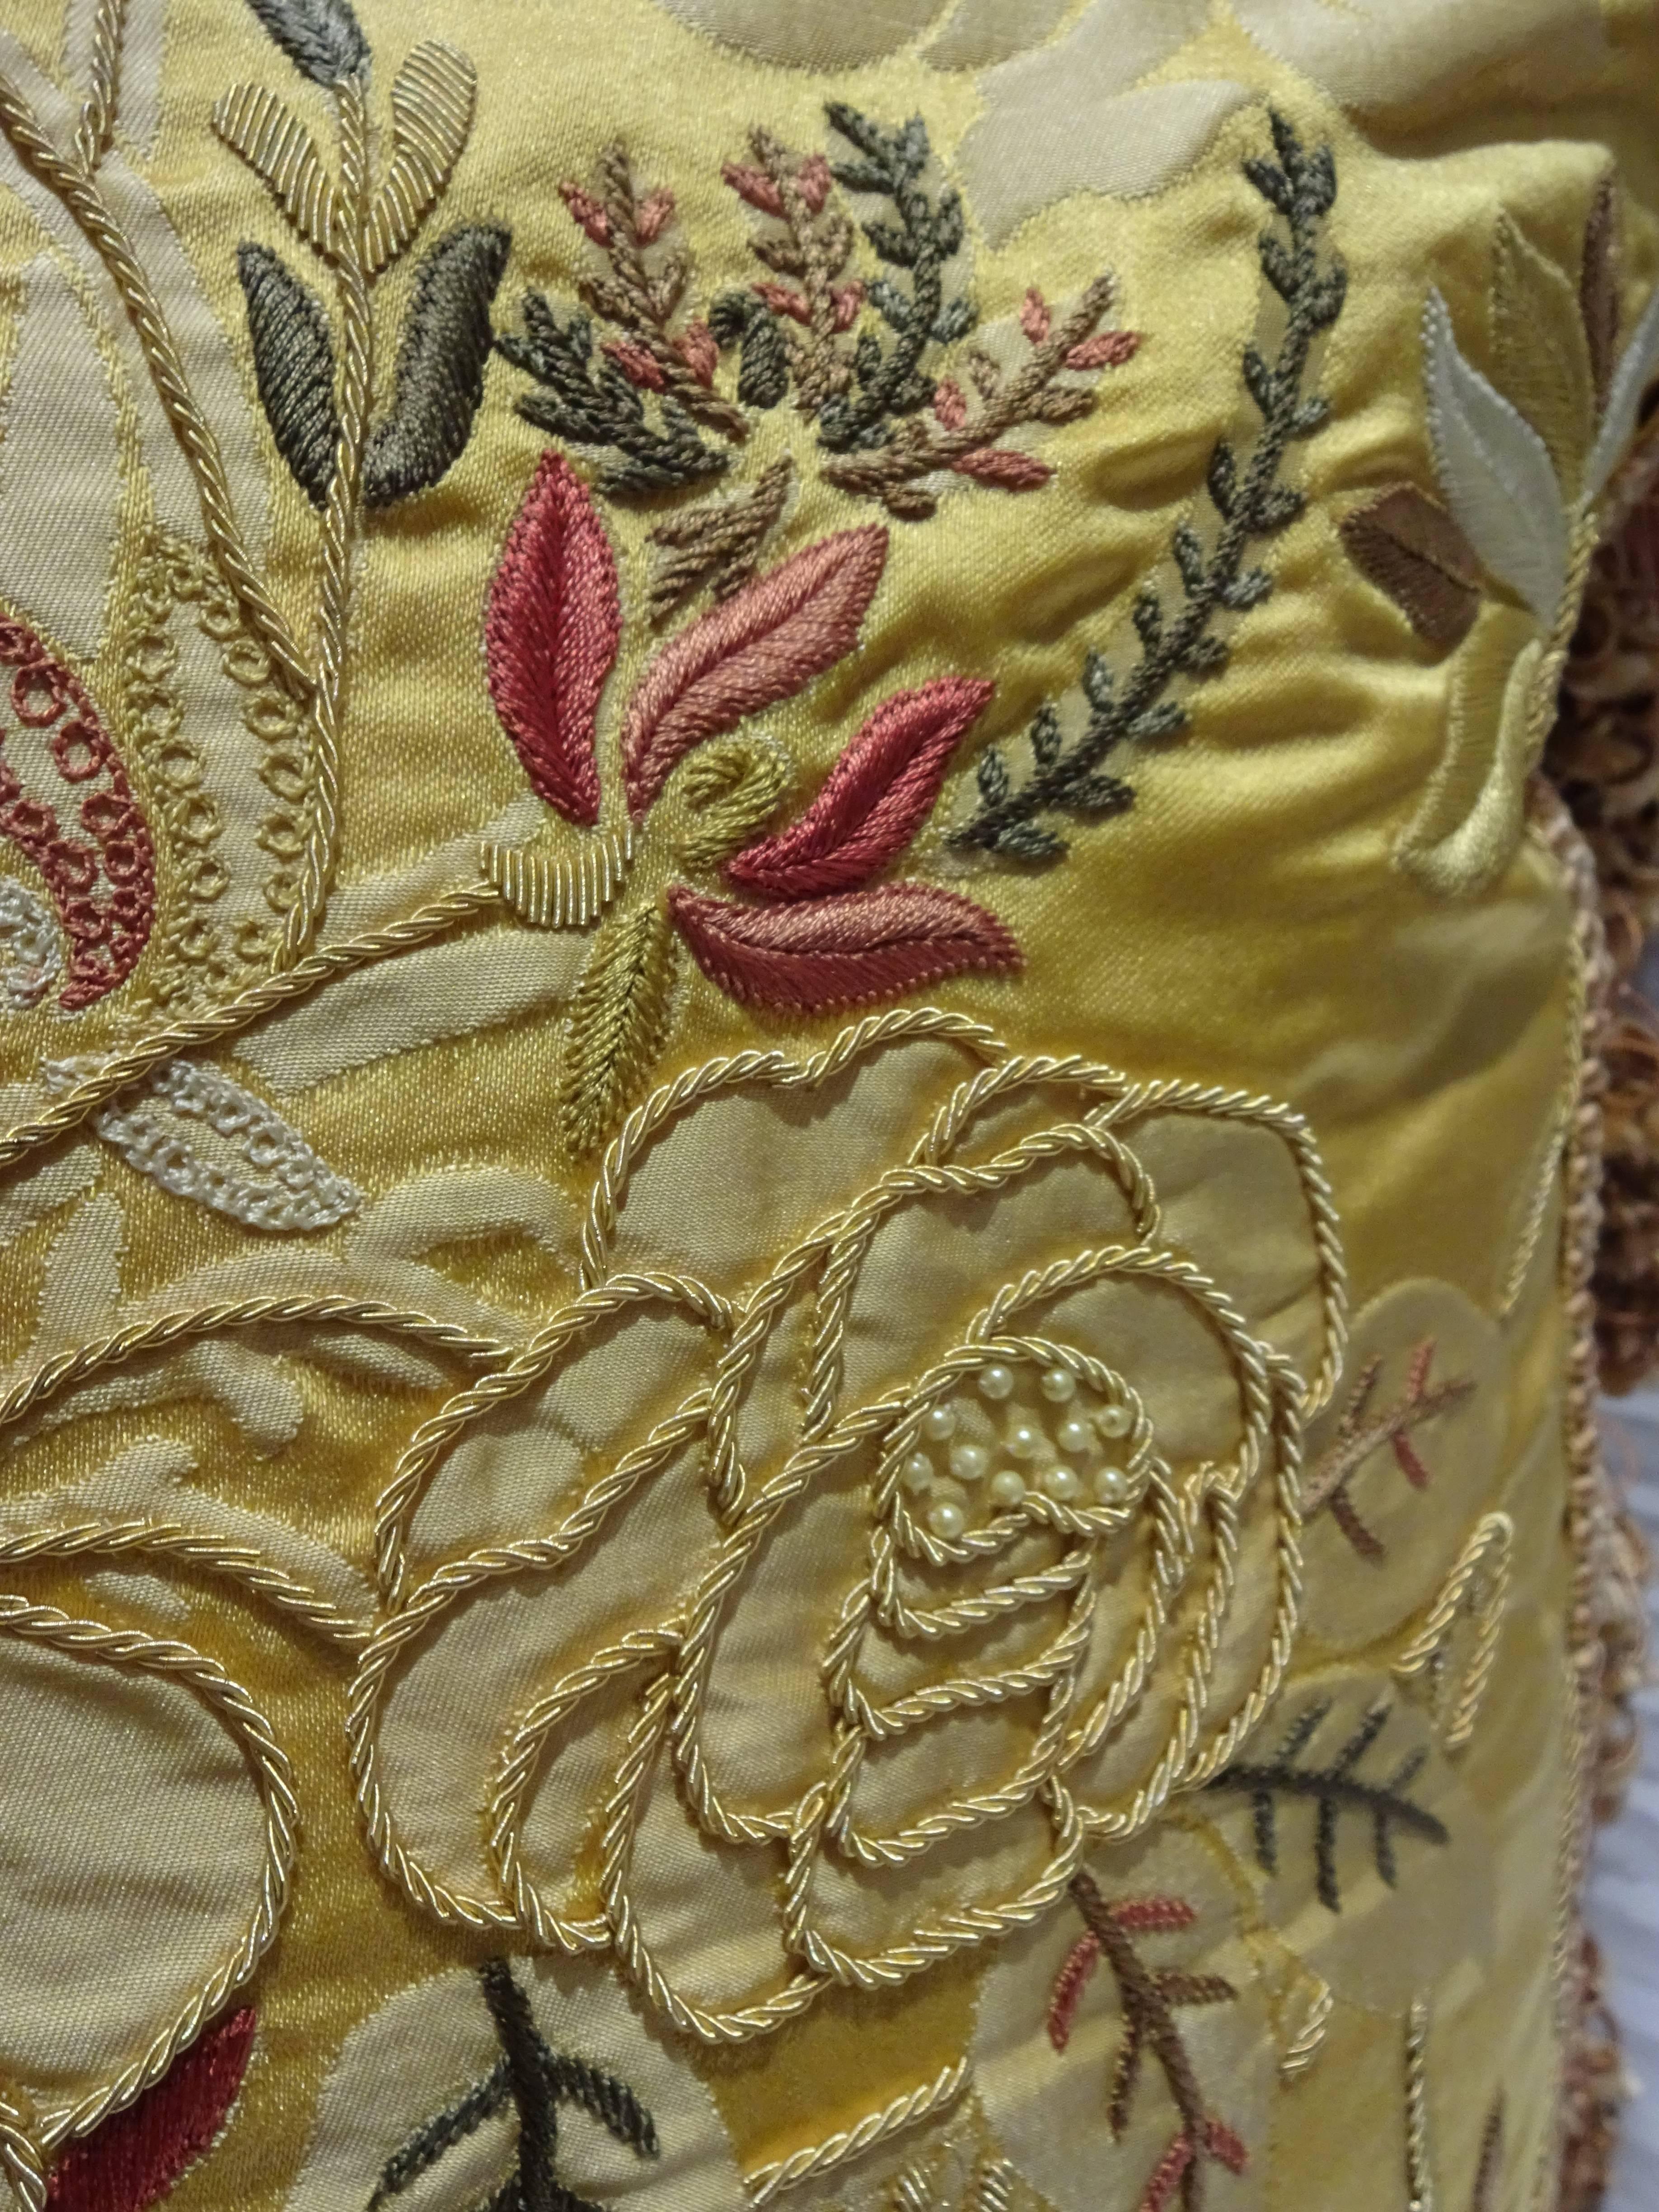 20th Century Exquisite Embroidered Pillows, Scalamandre Fabric